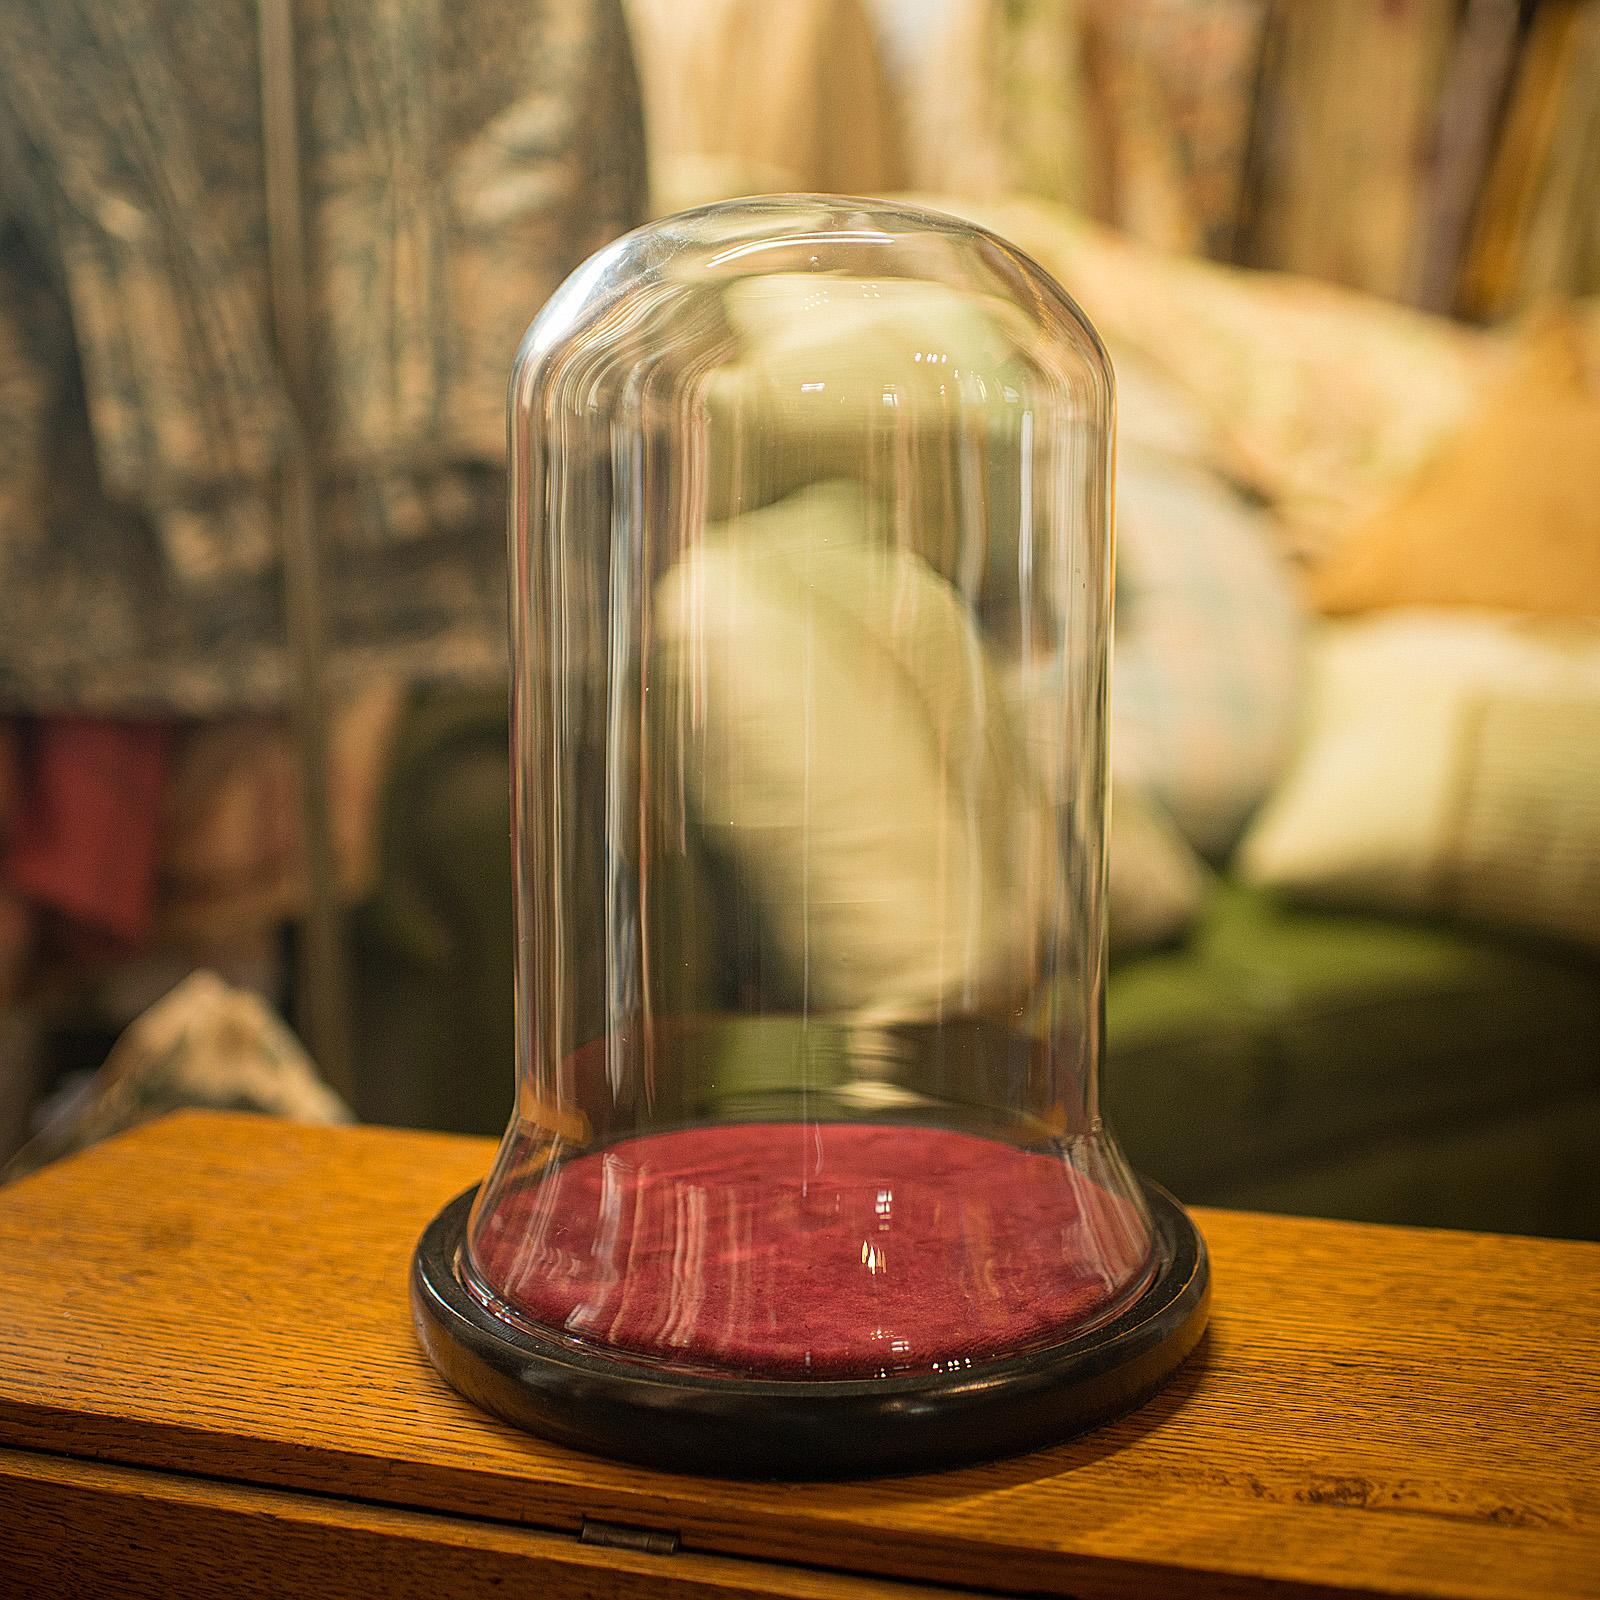 This is an antique bell bottom display dome. An English, glass over ebonised pine taxidermy or collectible showcase, dating to the Edwardian period, circa 1910.

Showcase your treasured items within quality Edwardian glass
Displaying a desirable